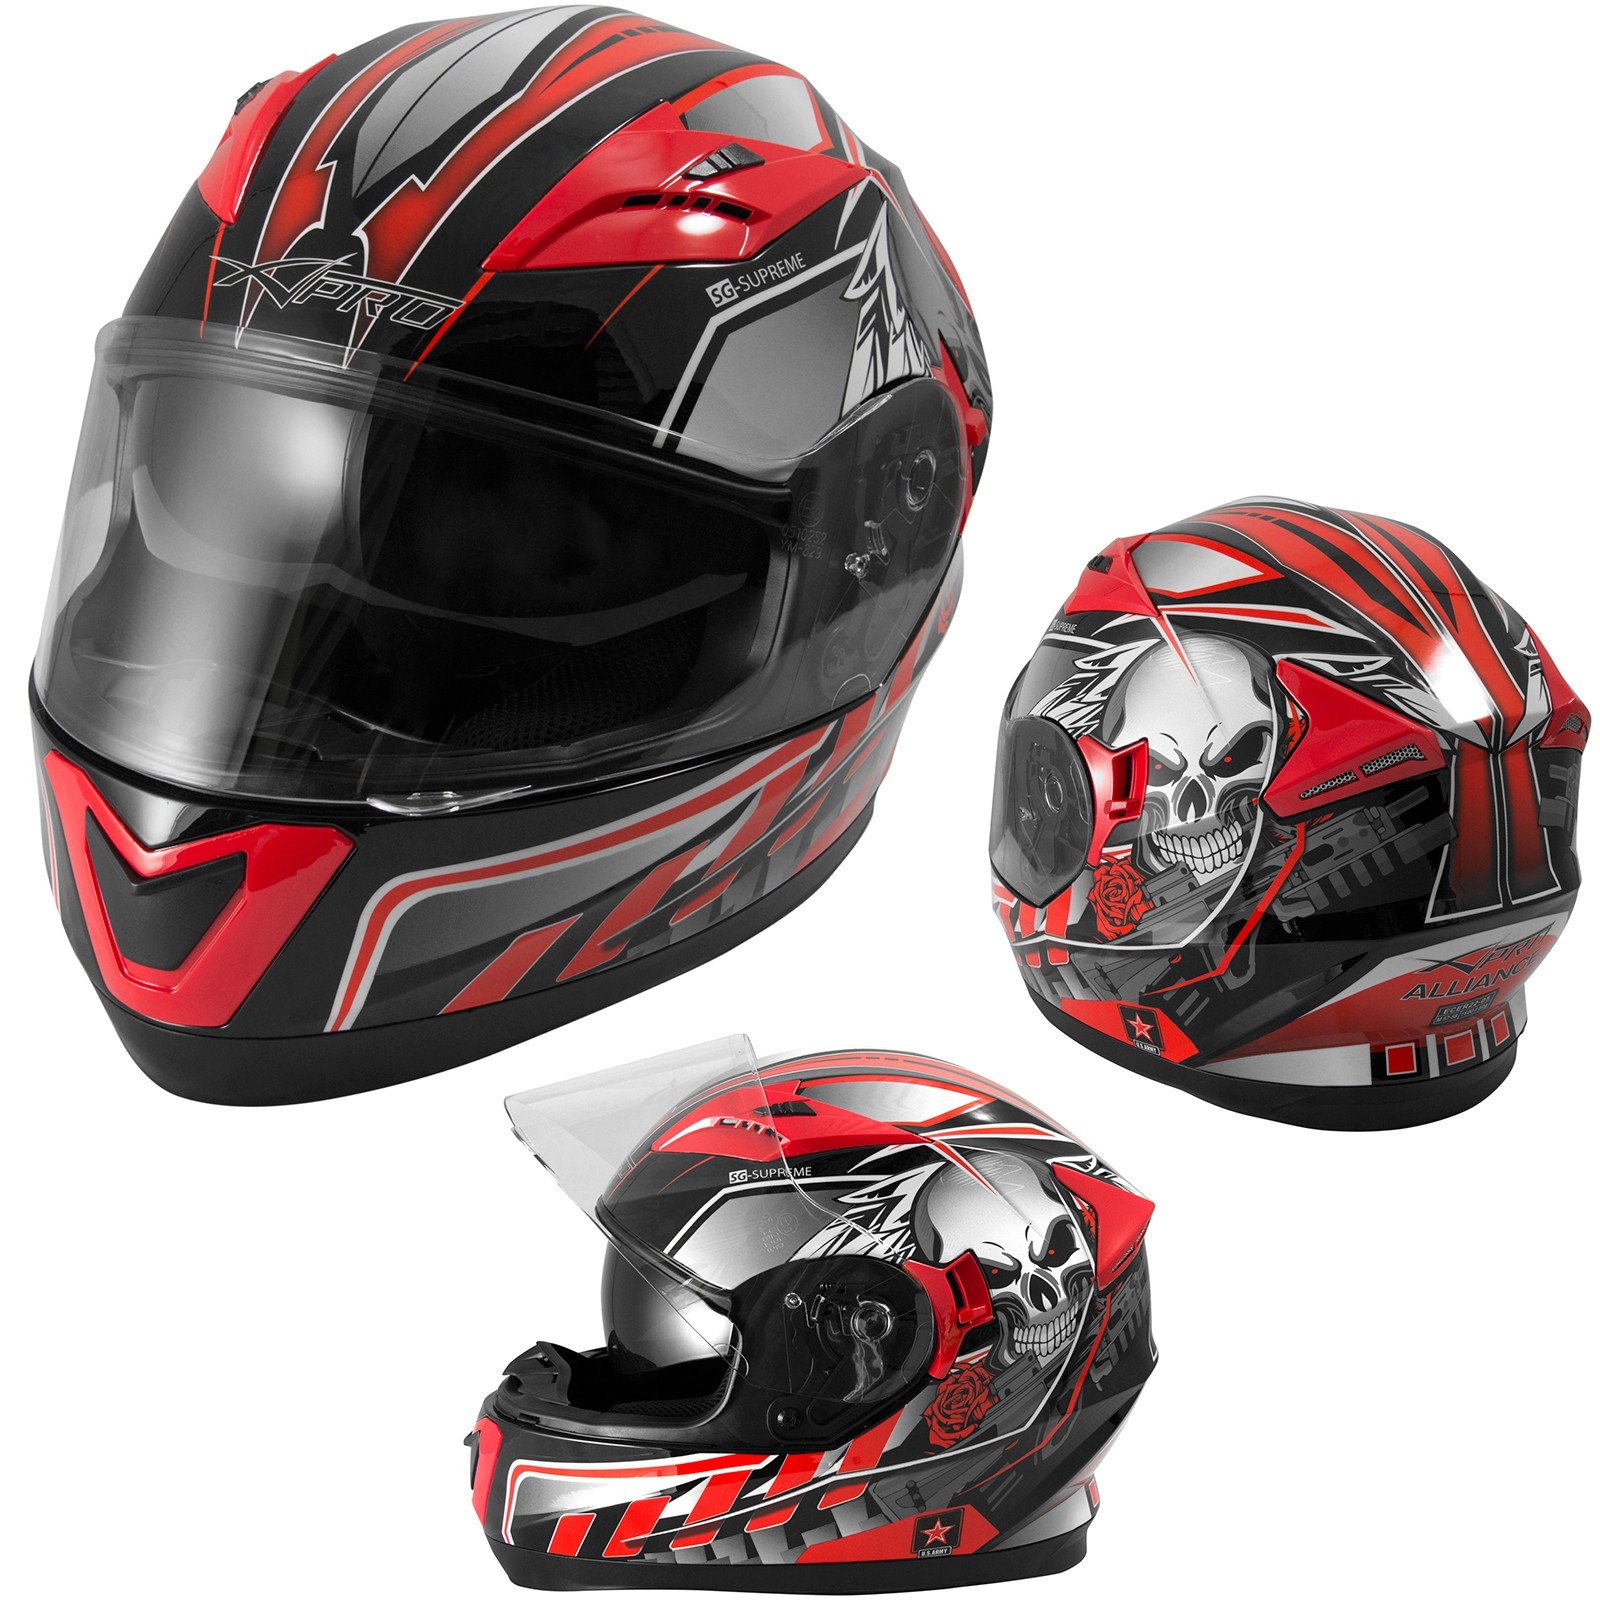 https://www.sonicmotoshop.it/media/catalog/product/cache/4/image/9df78eab33525d08d6e5fb8d27136e95/a/l/alliance_helmet_motorcycle_red_a-pro_compo.jpg